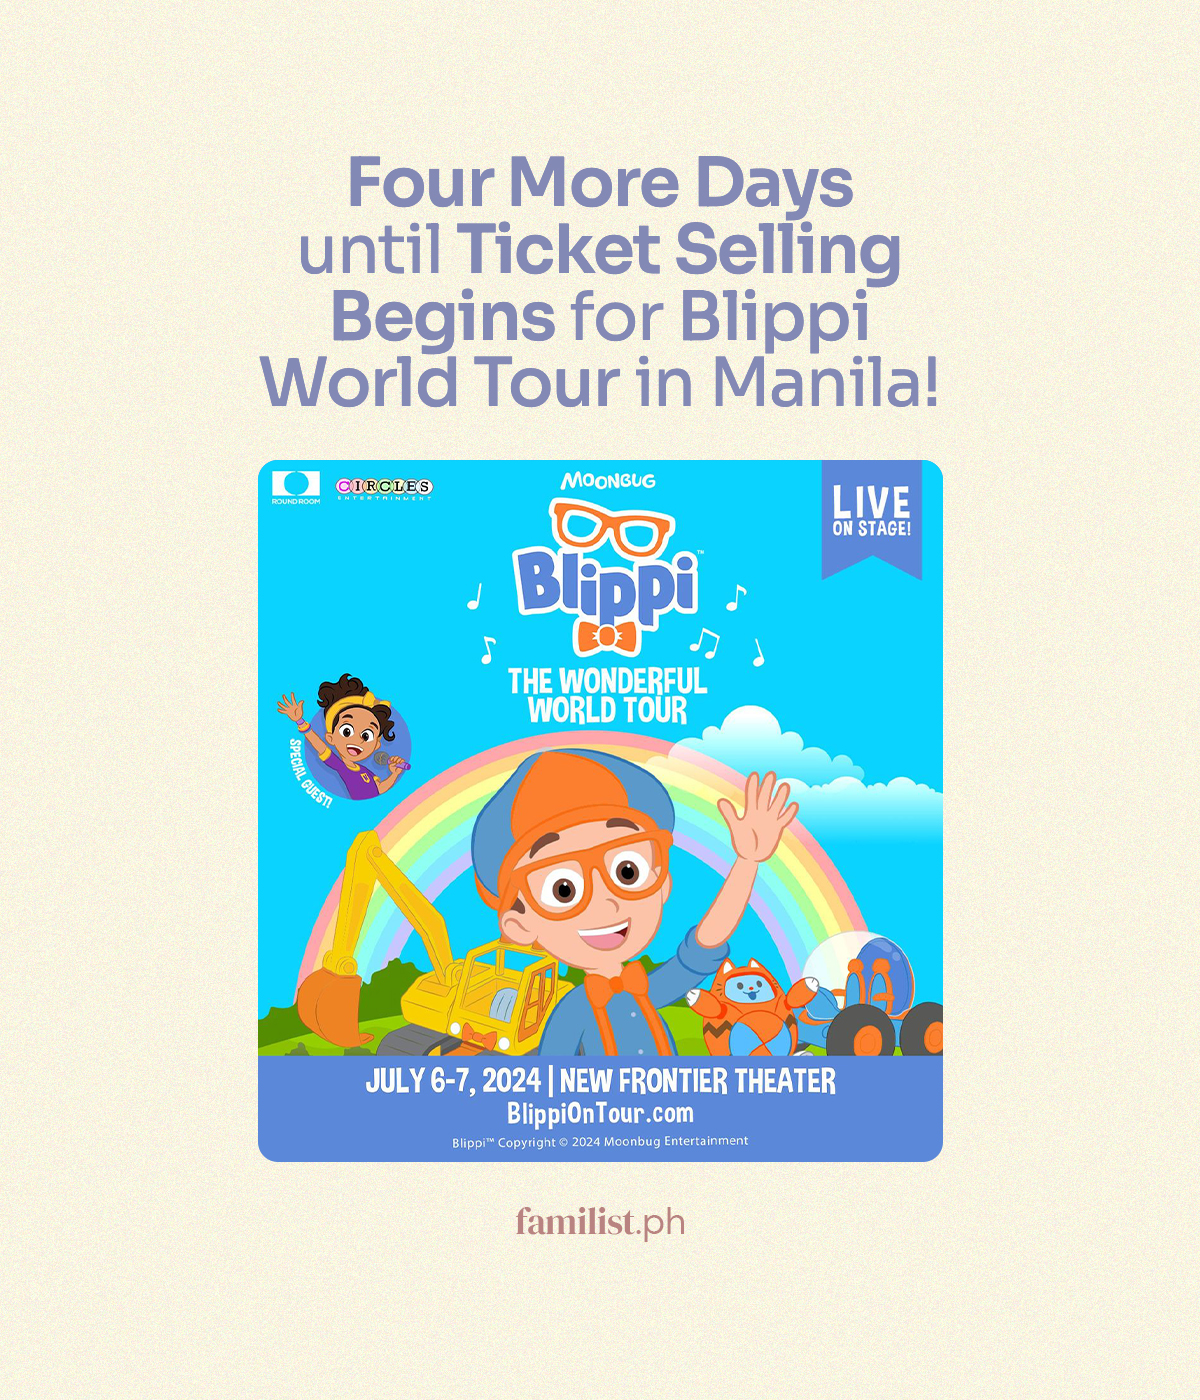 Four More Days until Ticket Selling Begins for Blippi World Tour in Manila